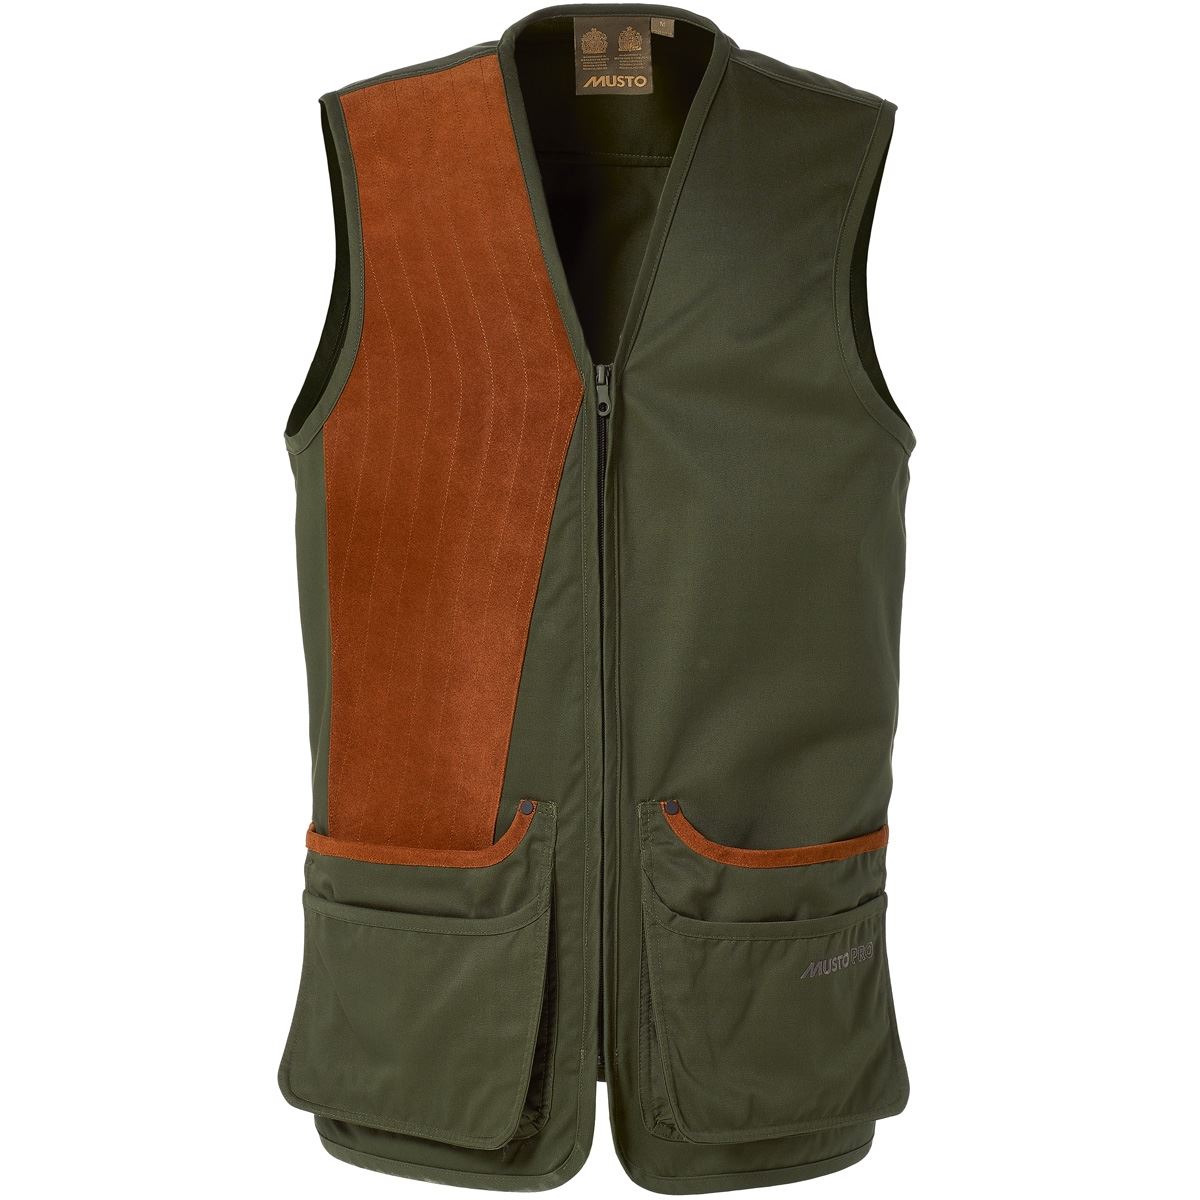 What features does the Musto shooting vest have?